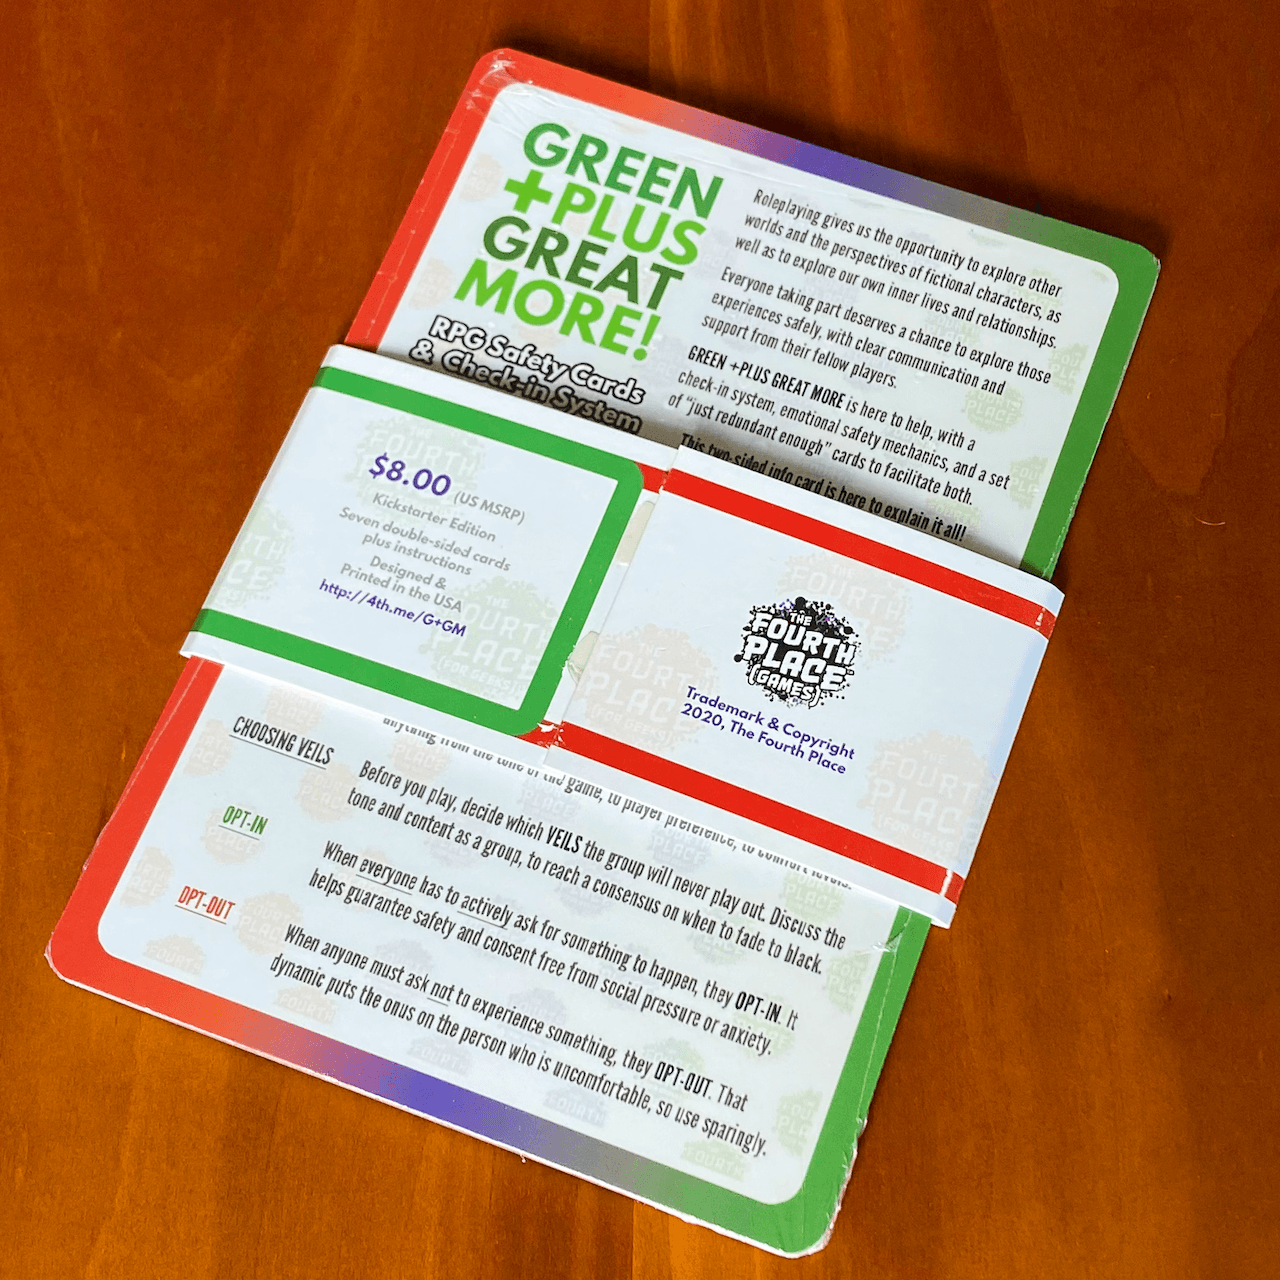 GREEN +PLUS GREAT MORE! RPG Calibration & Check-In Cards - The Fourth Place